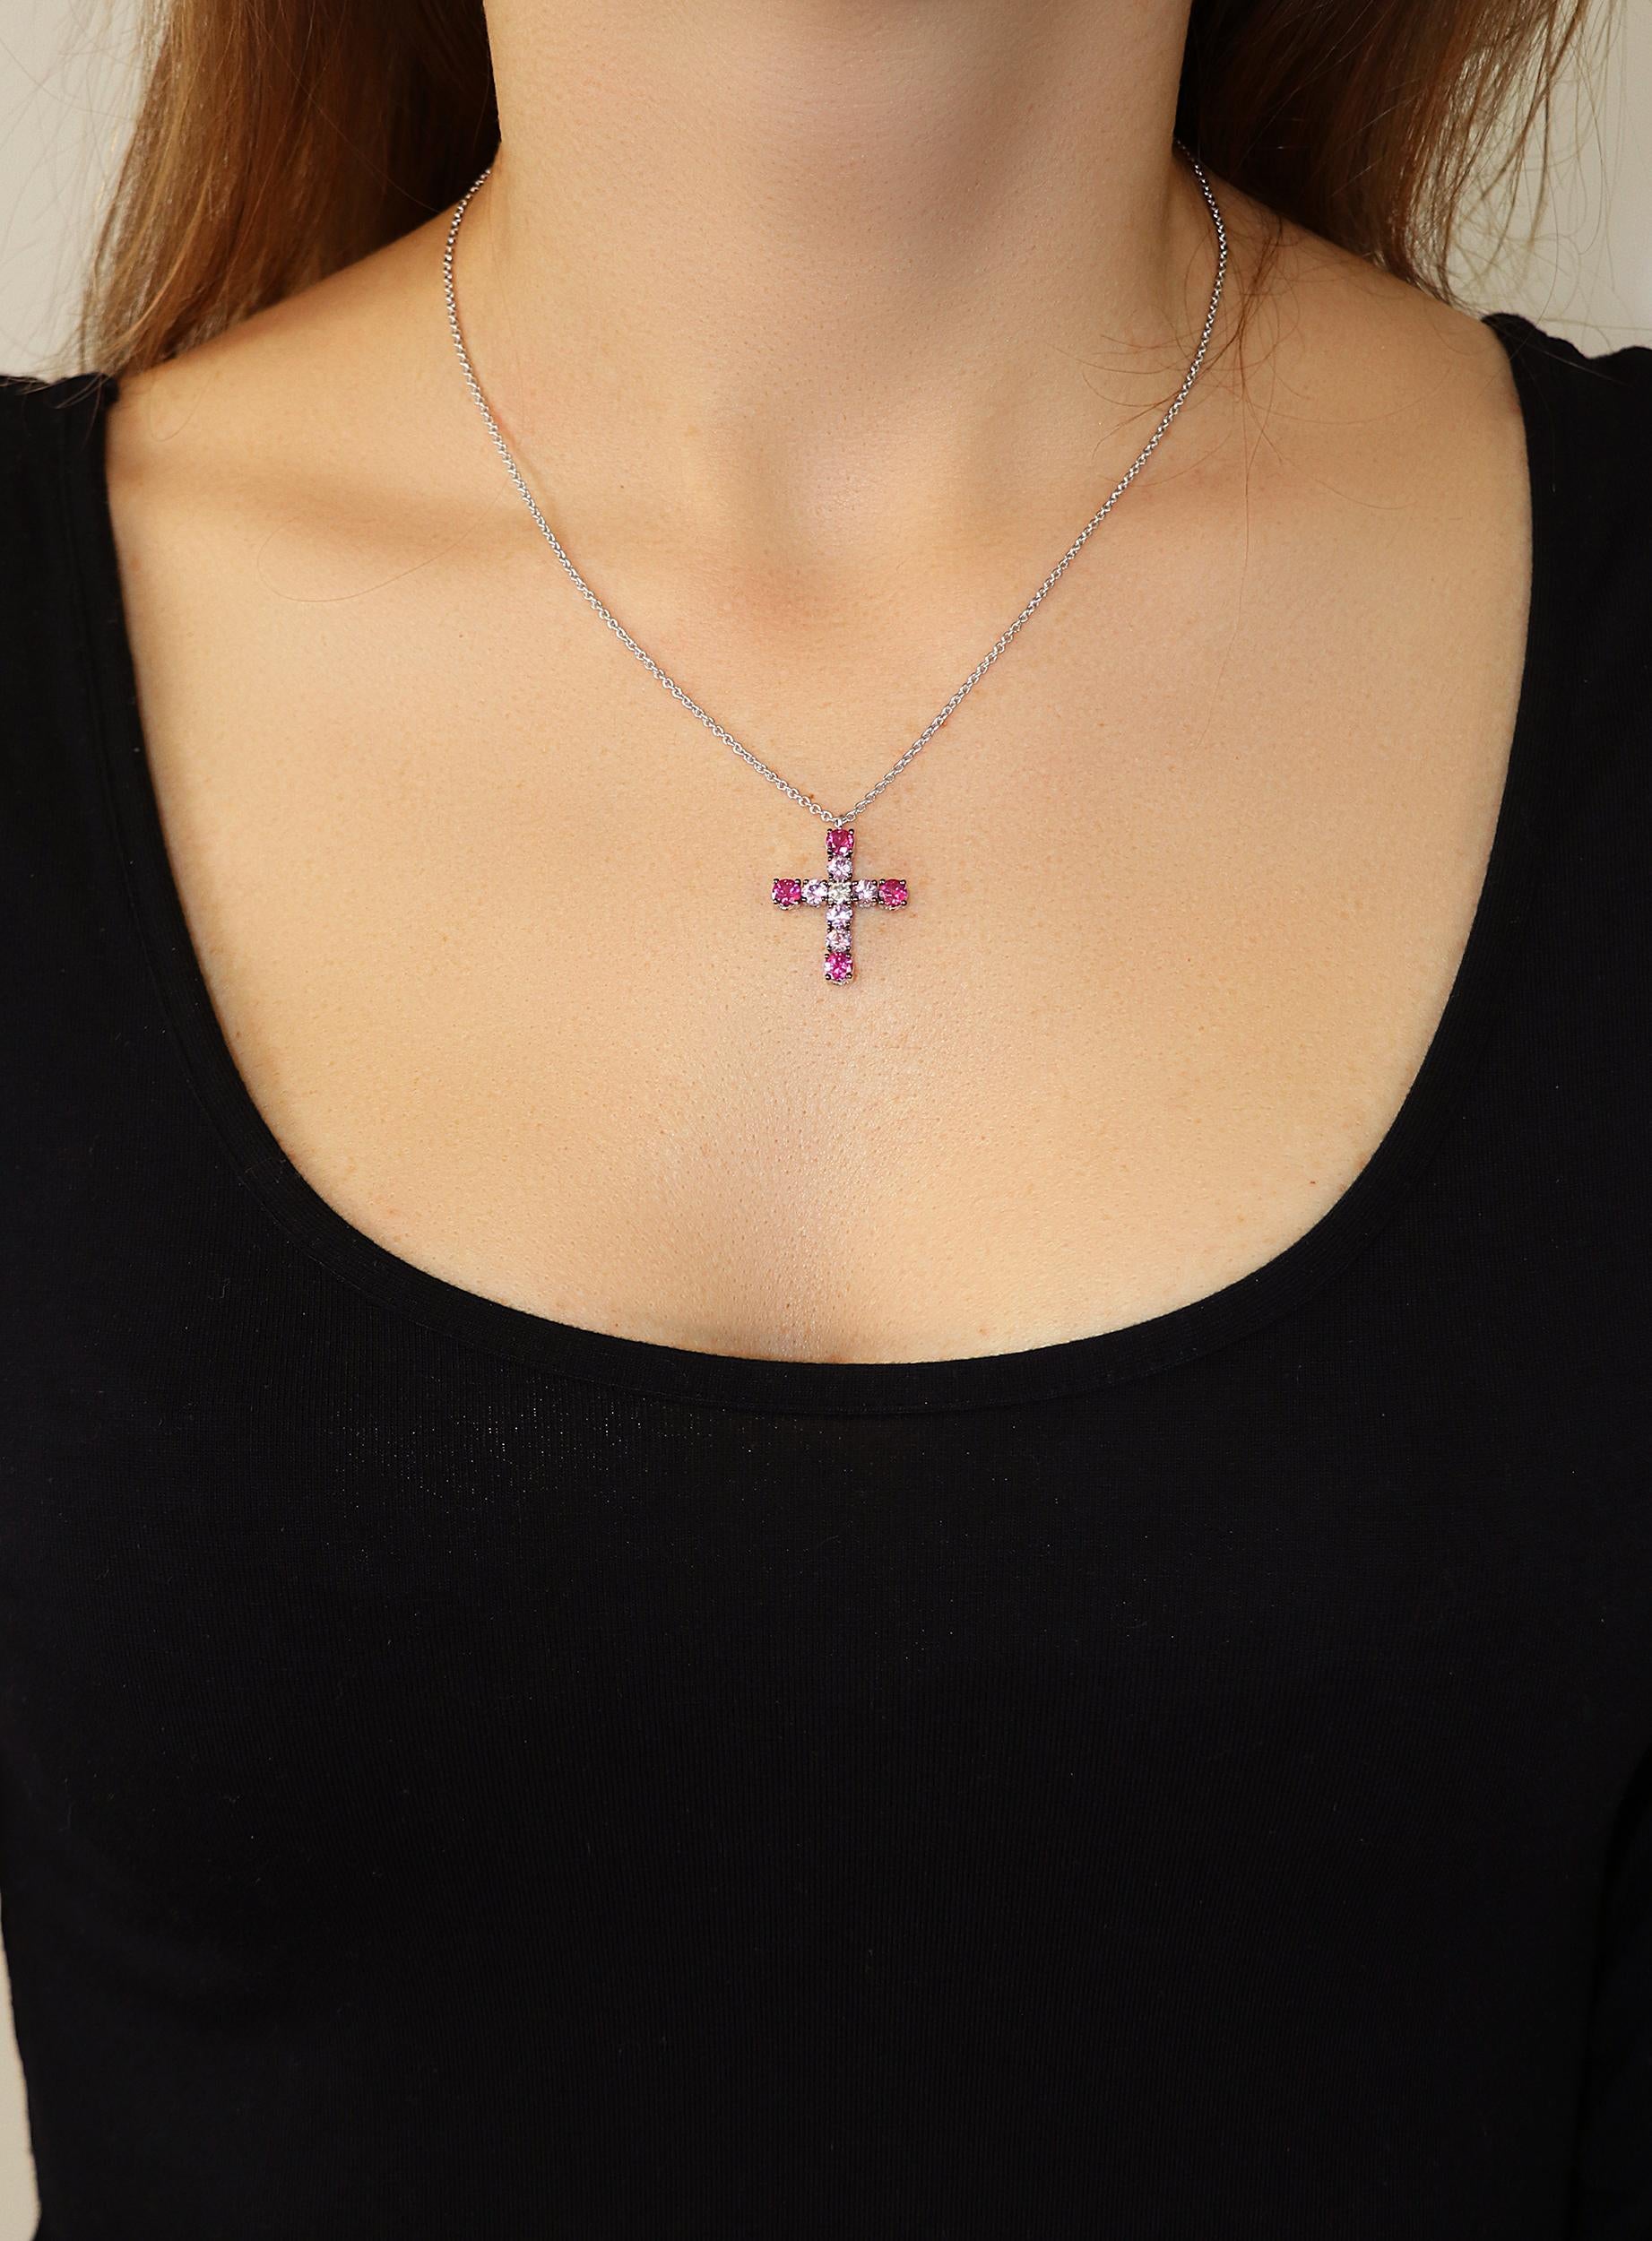 0.11 GVS Diamond 0.96 Pink Sapphire 0.95 Ruby 18 Karat White Gold Cross Necklace In New Condition For Sale In Valenza, IT